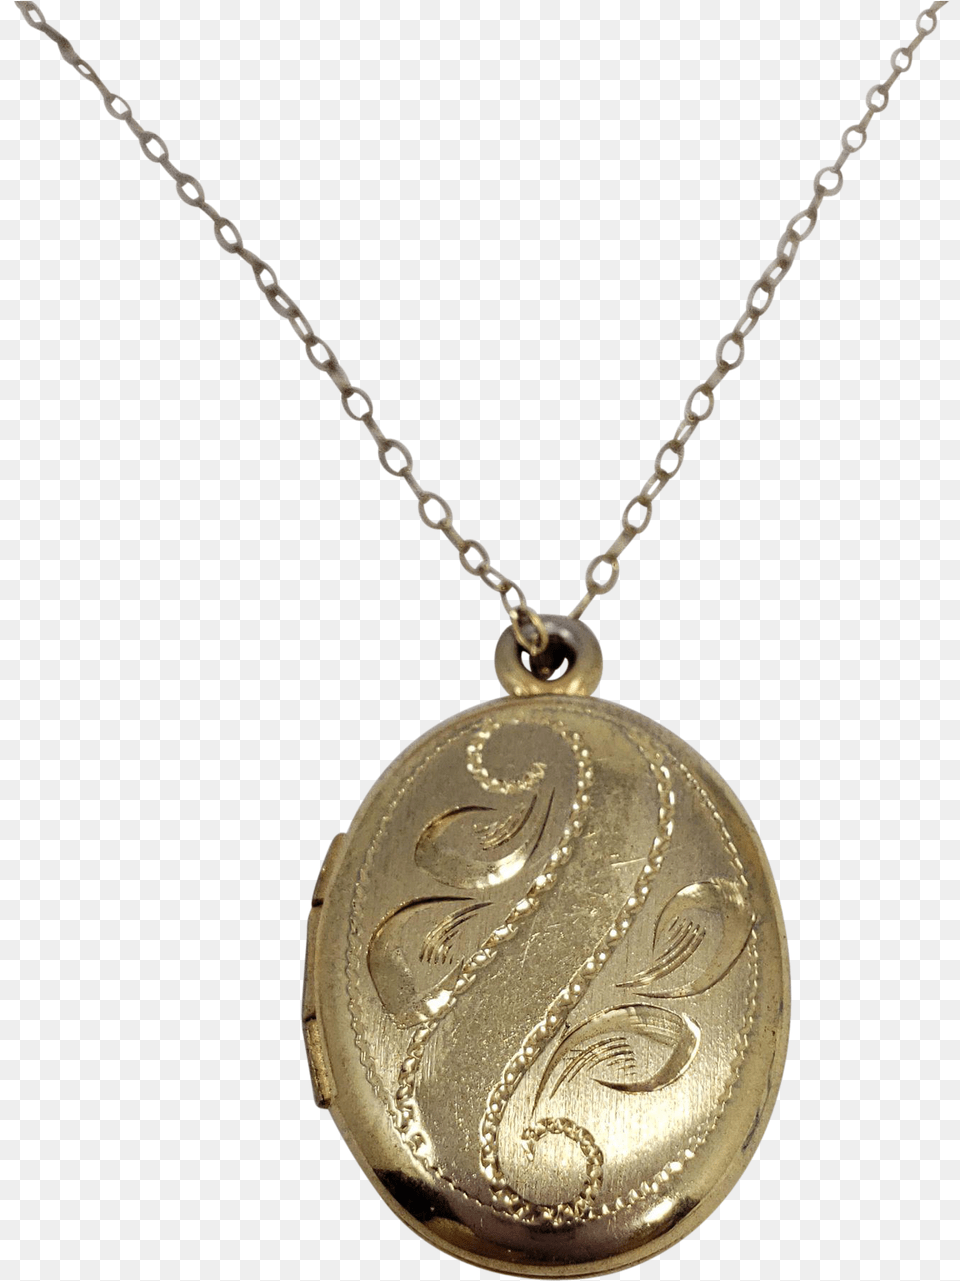 Oval Locket Pendant 10k Yellow Gold Filigree Detail Necklace That Opens, Accessories, Jewelry Png